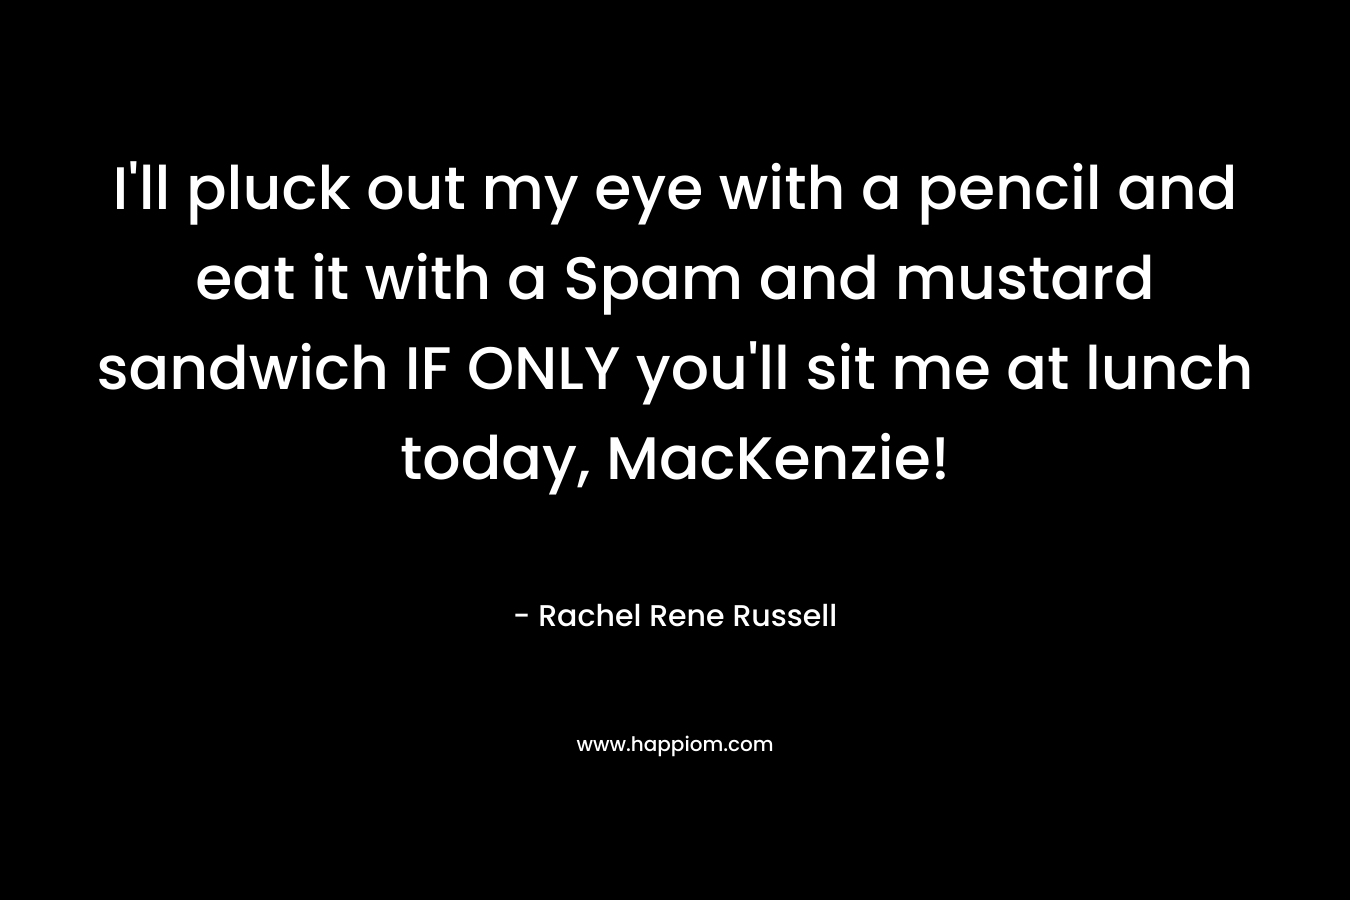 I'll pluck out my eye with a pencil and eat it with a Spam and mustard sandwich IF ONLY you'll sit me at lunch today, MacKenzie!